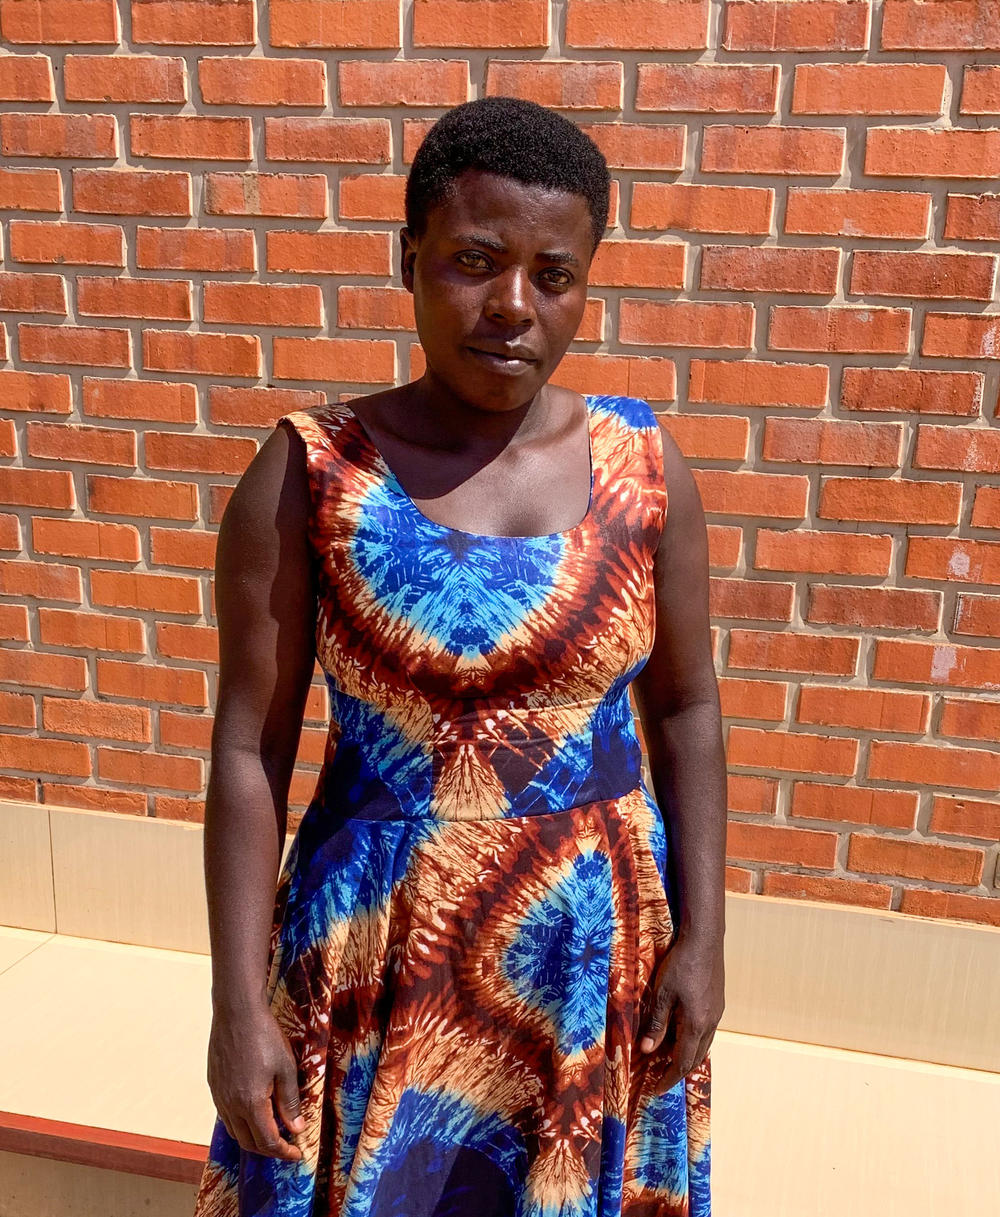 Akingeneye Theopiste was sentenced to 10 years in prison for using pills to self-induce an abortion in 2014. She served five years before receiving her pardon.